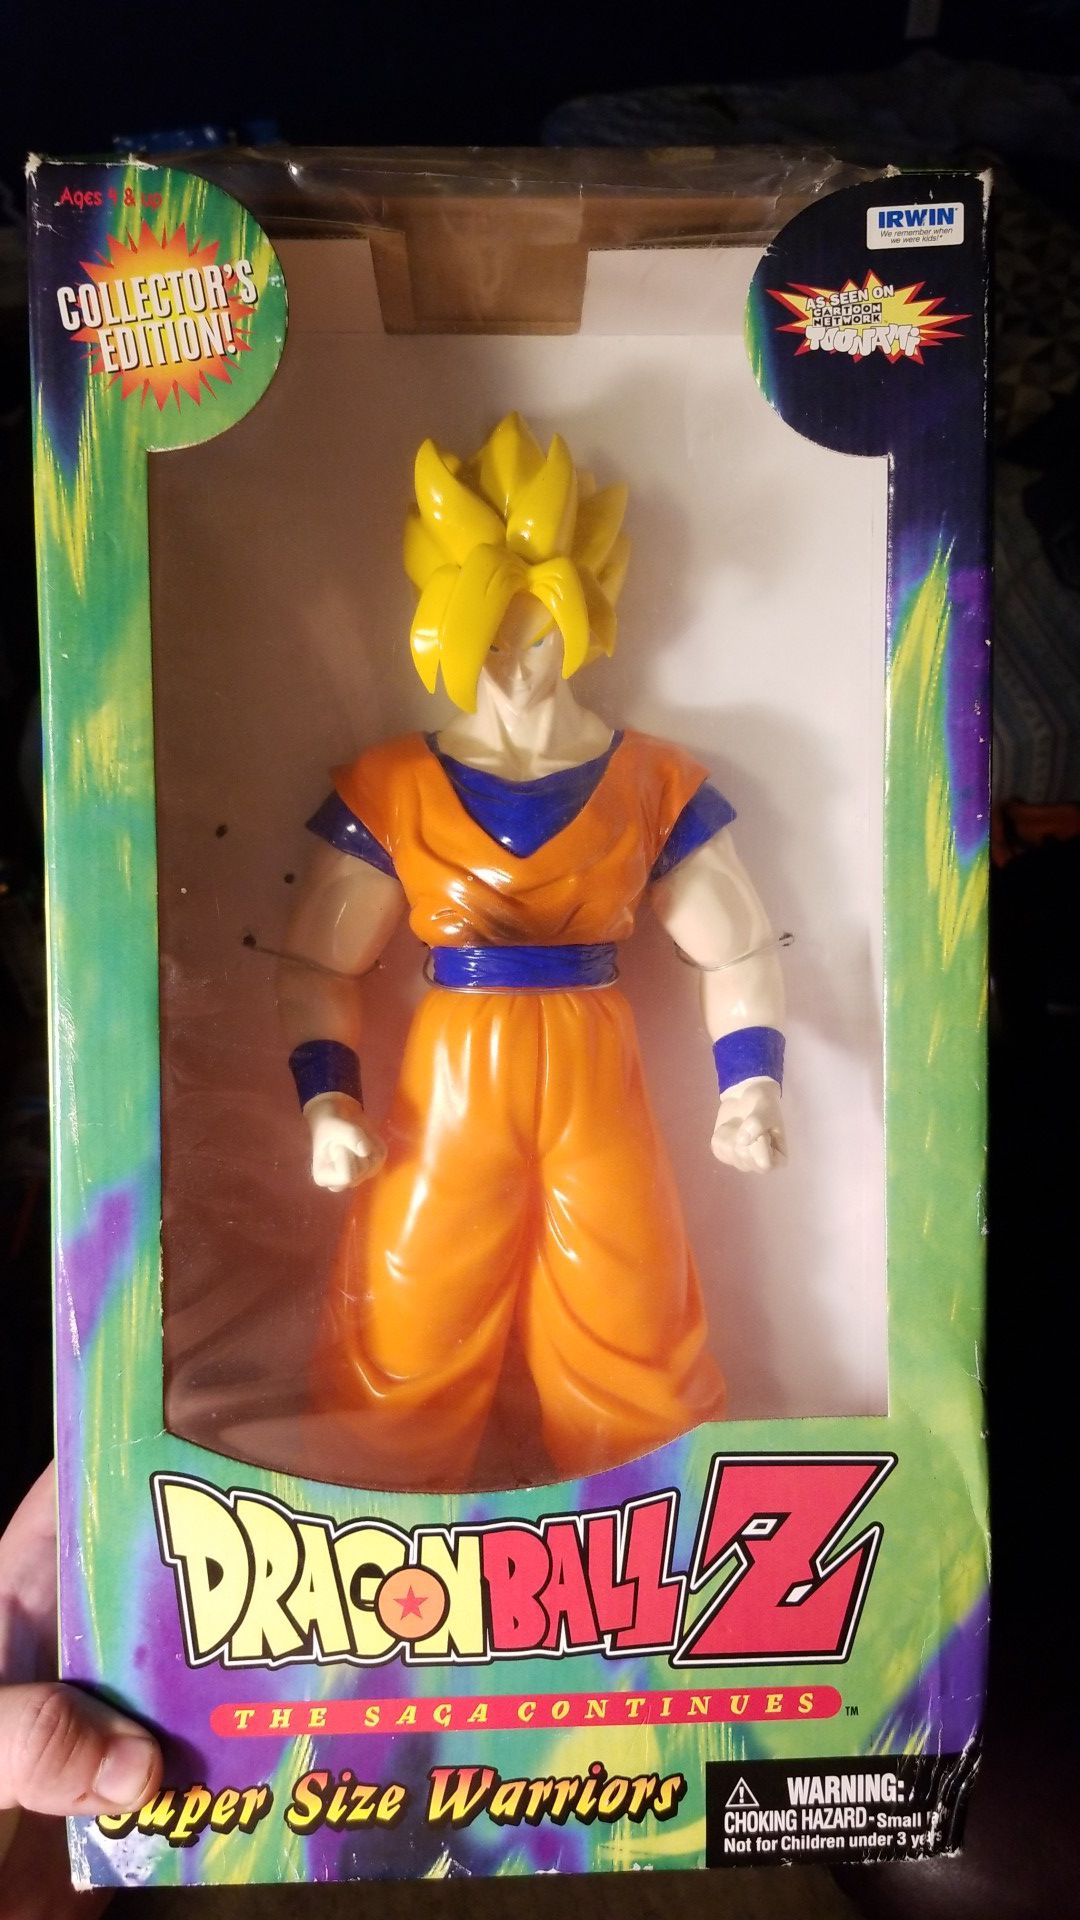 Original dragon ball z super size warrior from the 1990s never opened.